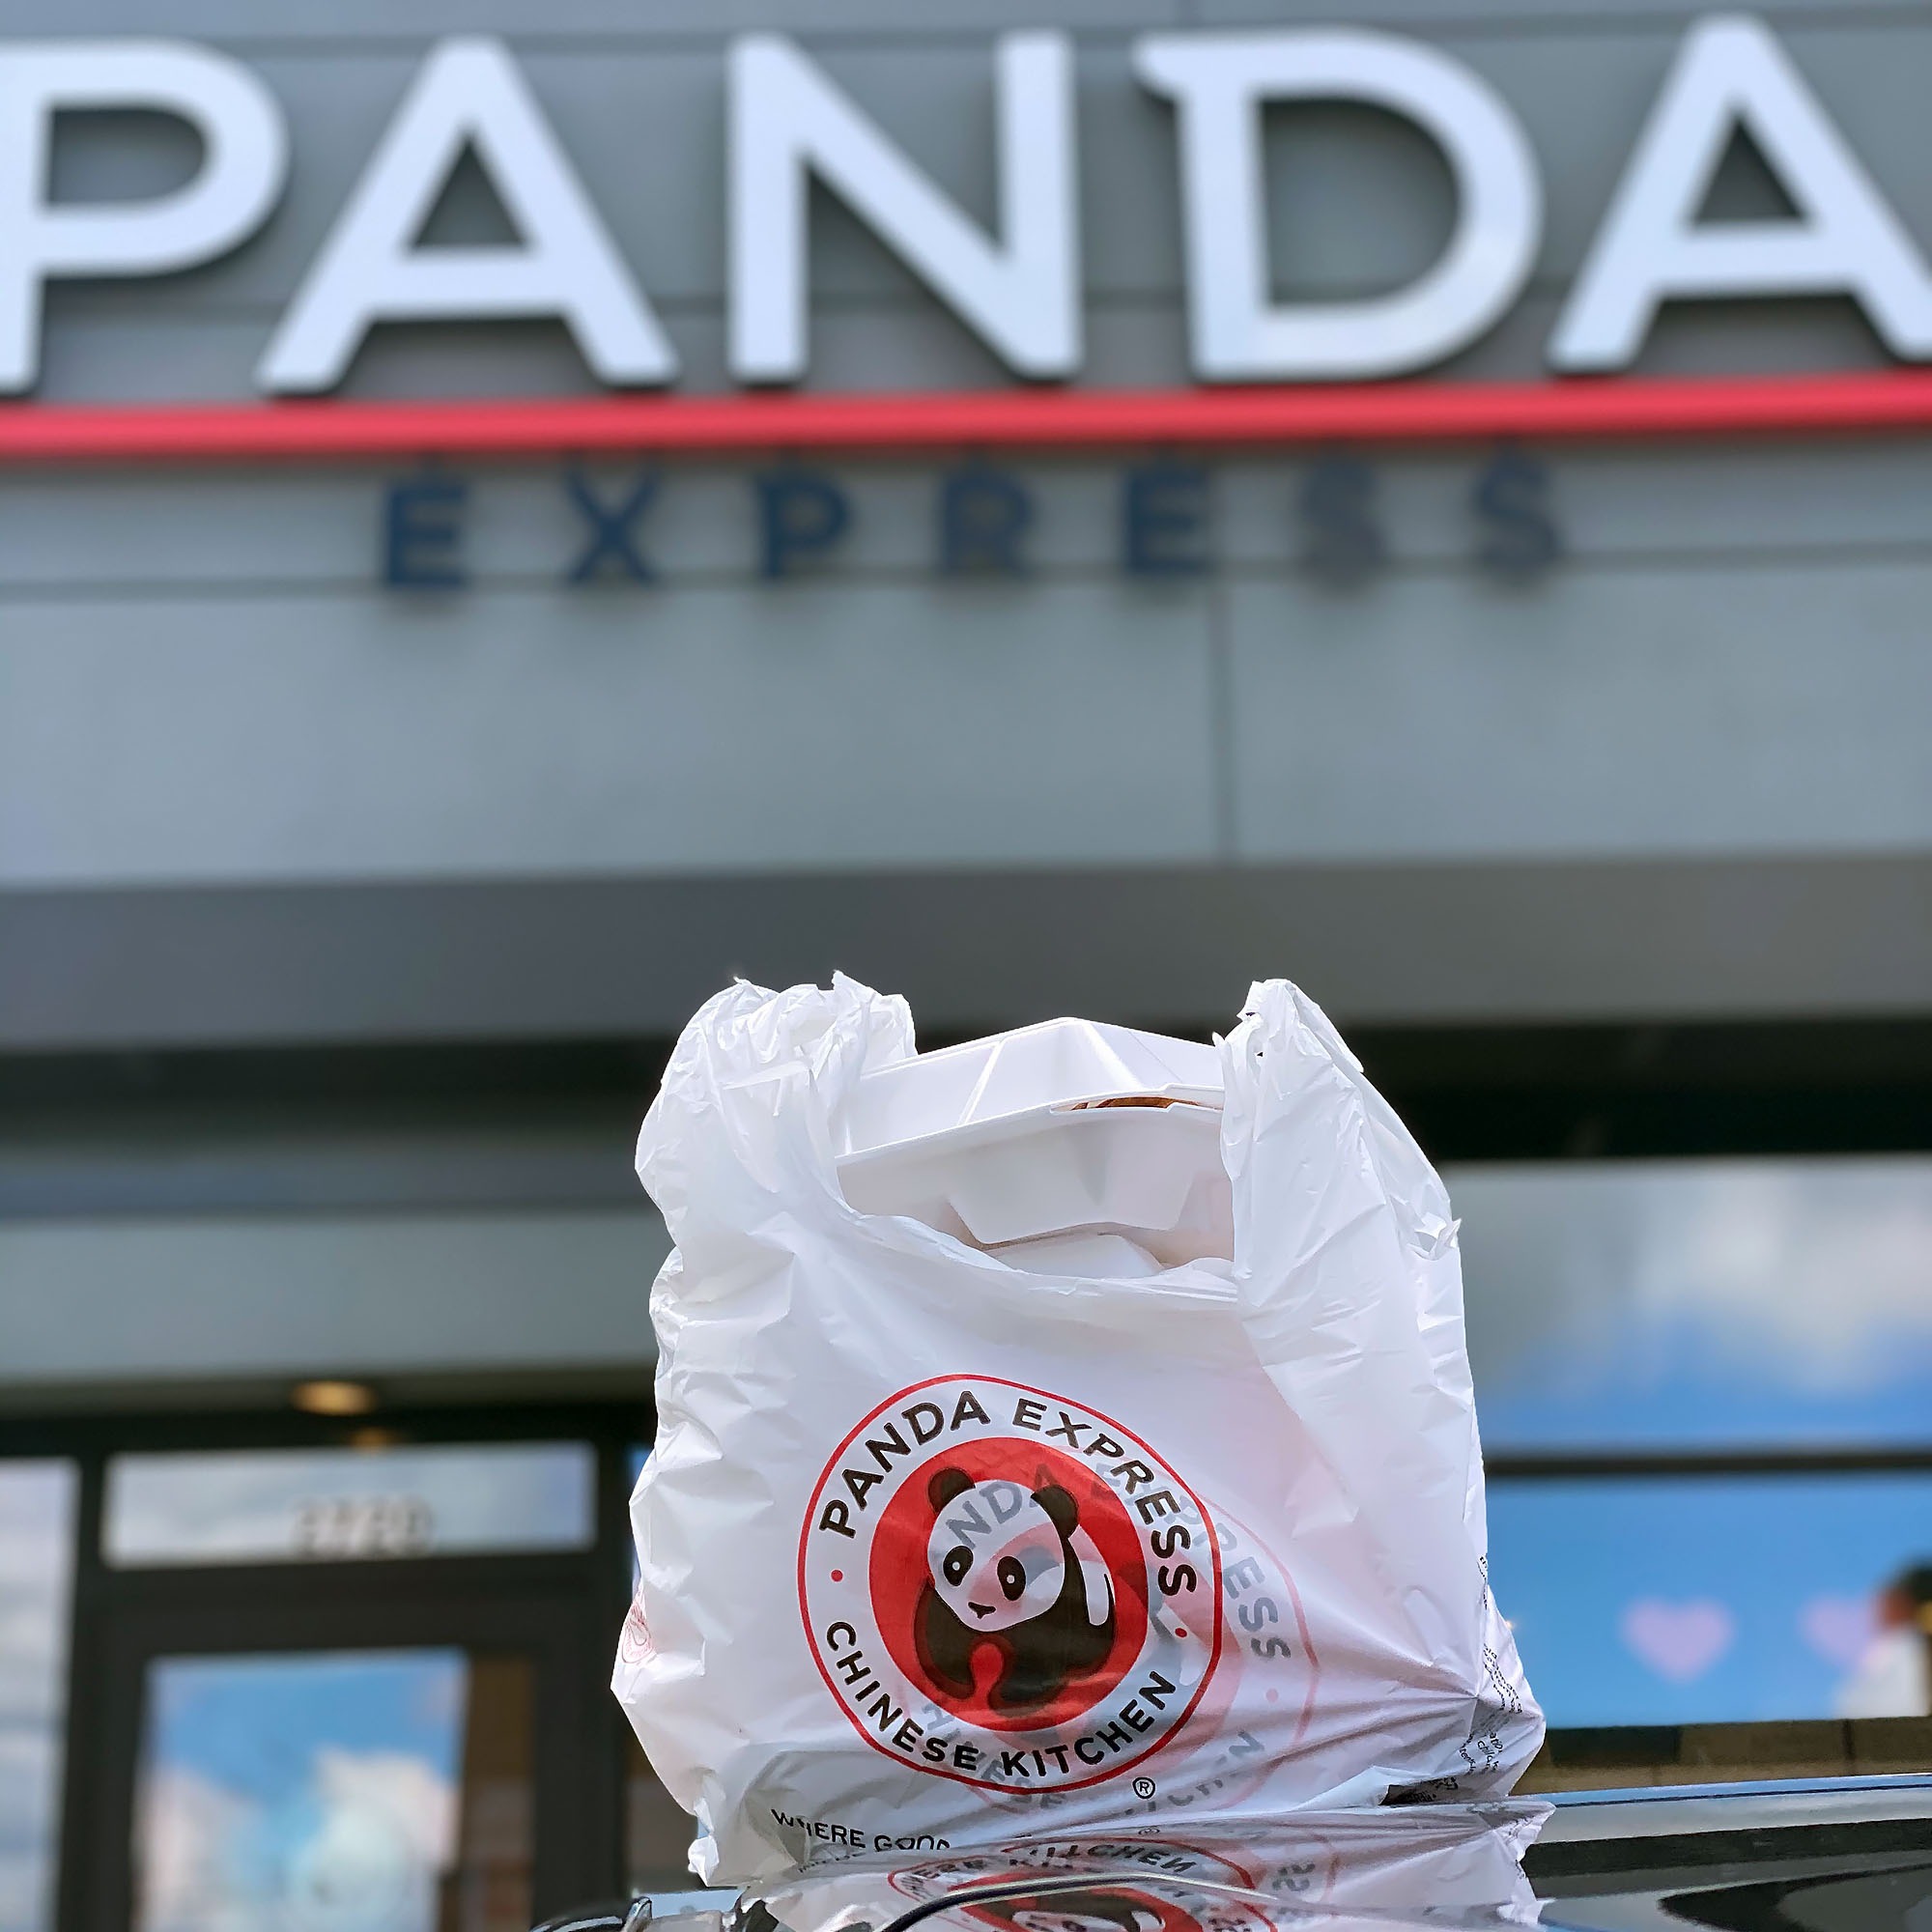 Food to go from Panda Express!